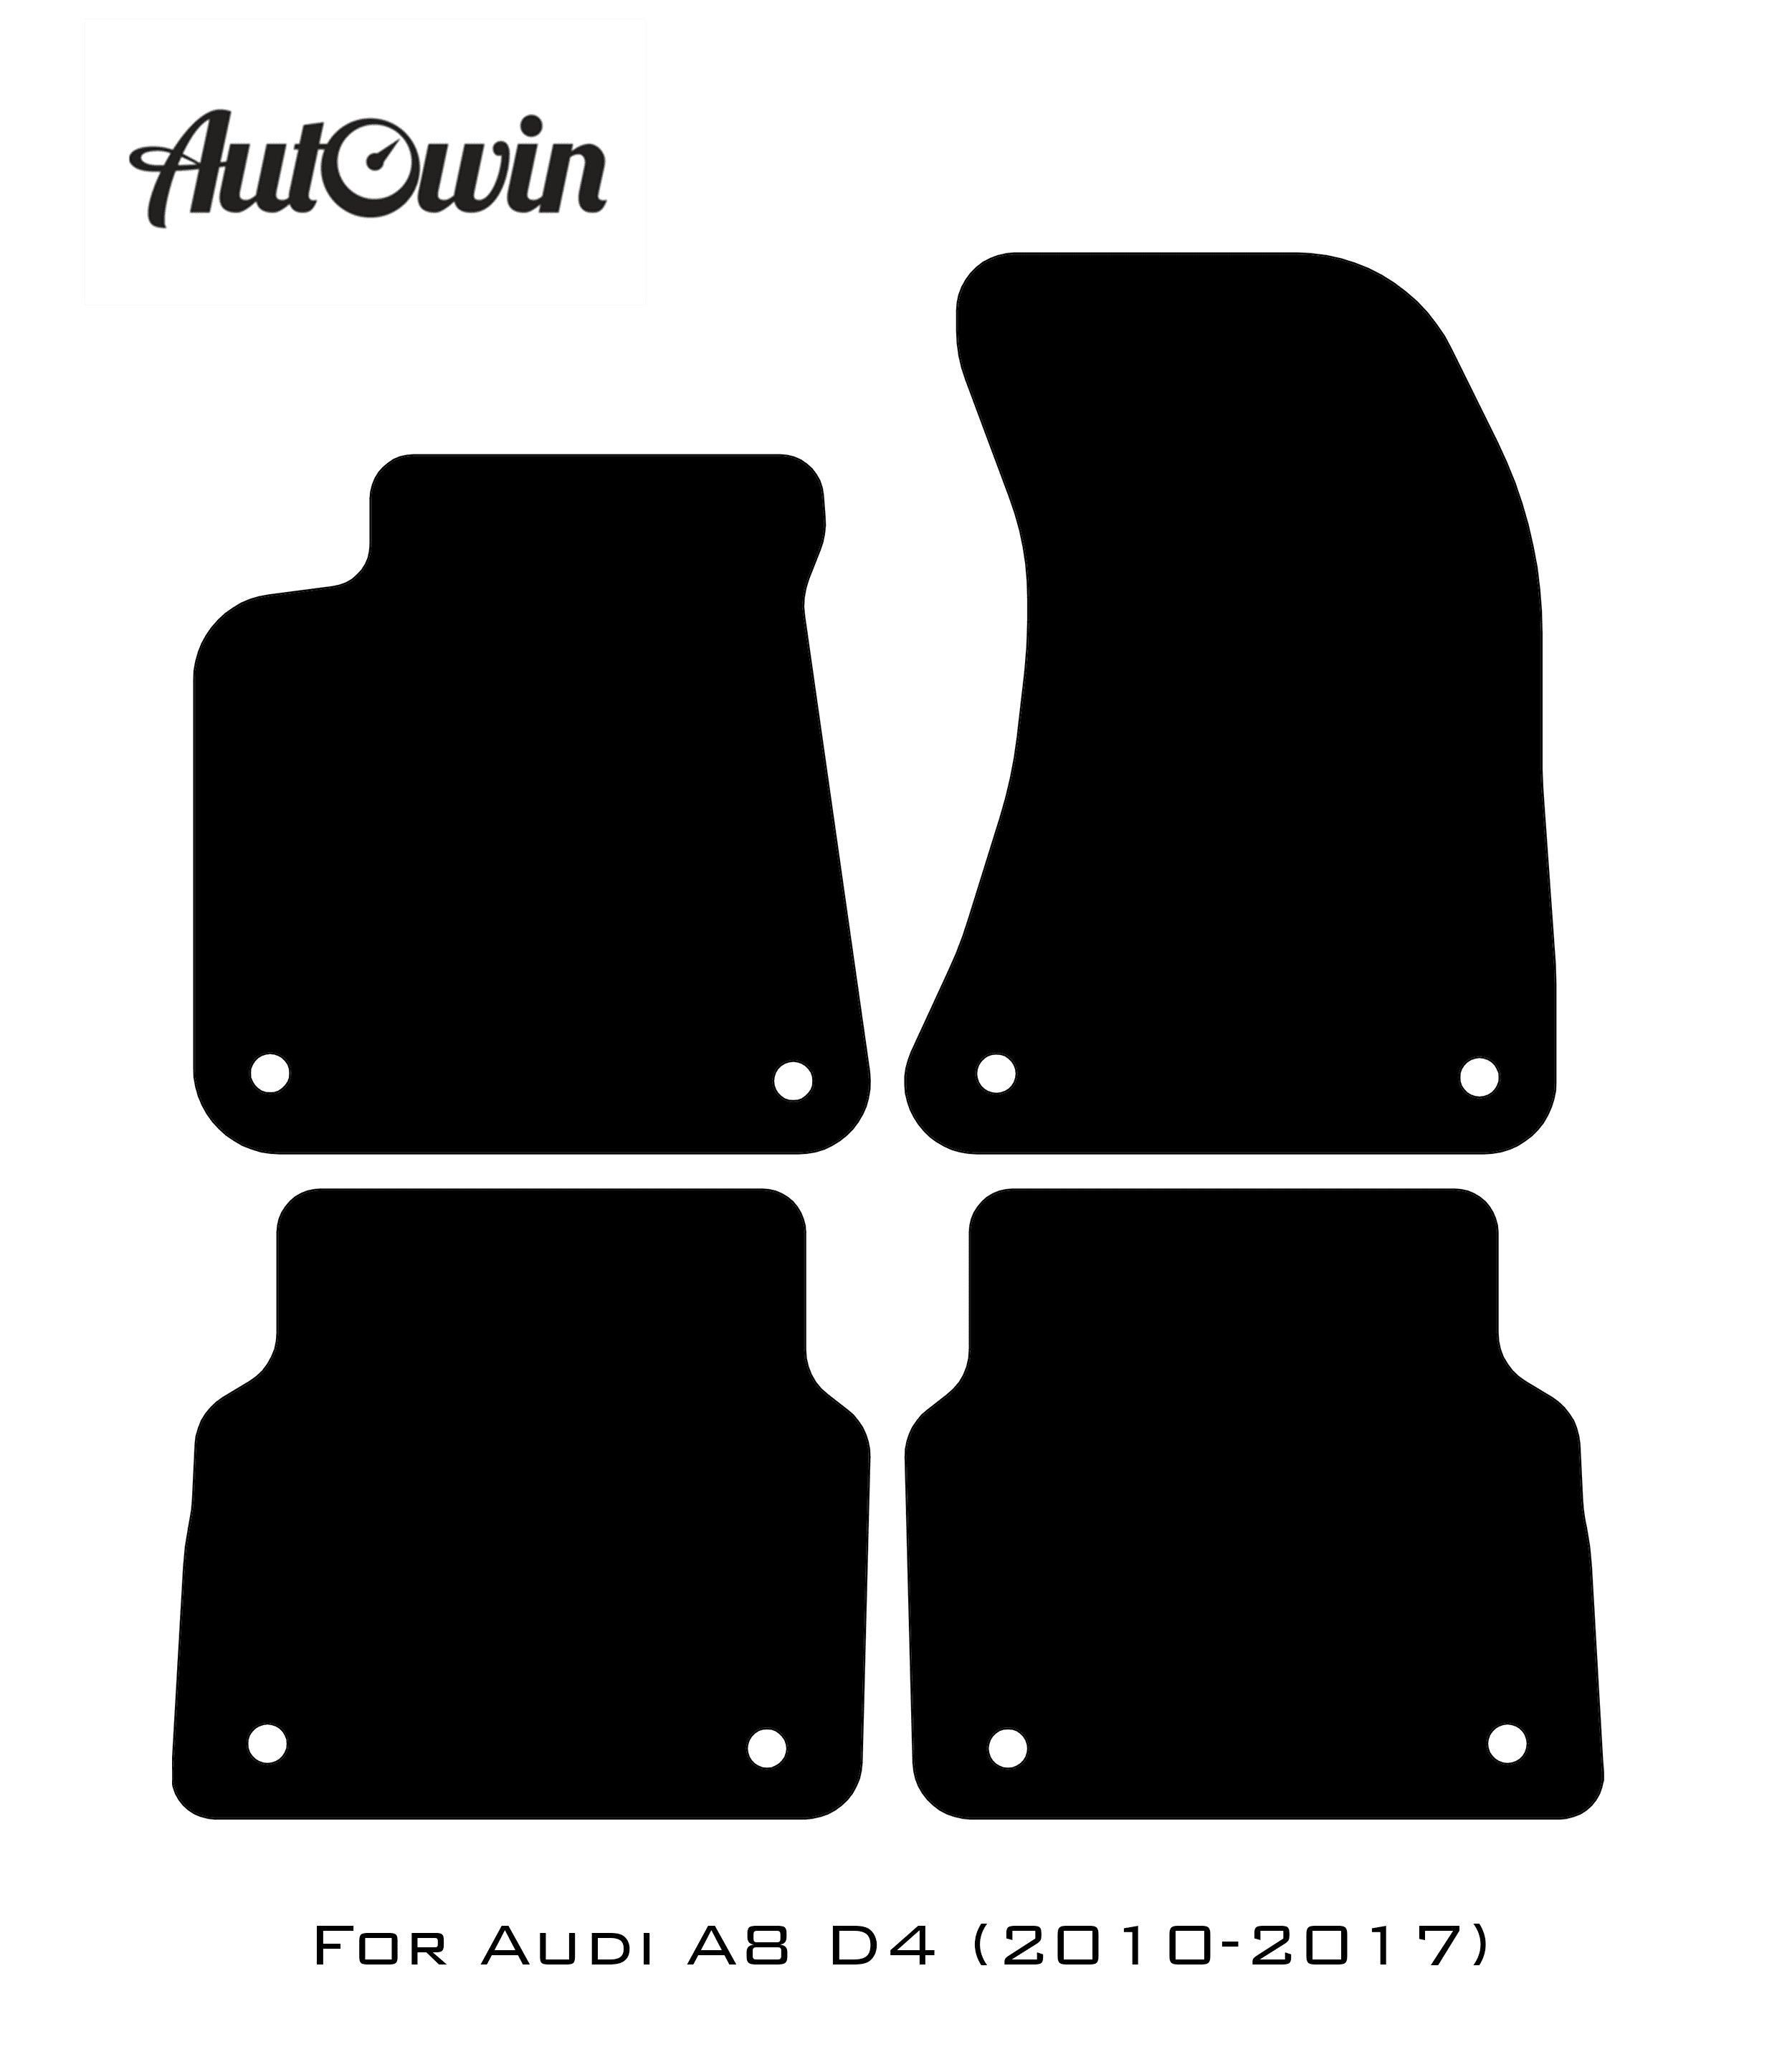 Floor Mats for Audi A8 D4 (2010-2017) Fighter Jet Edition